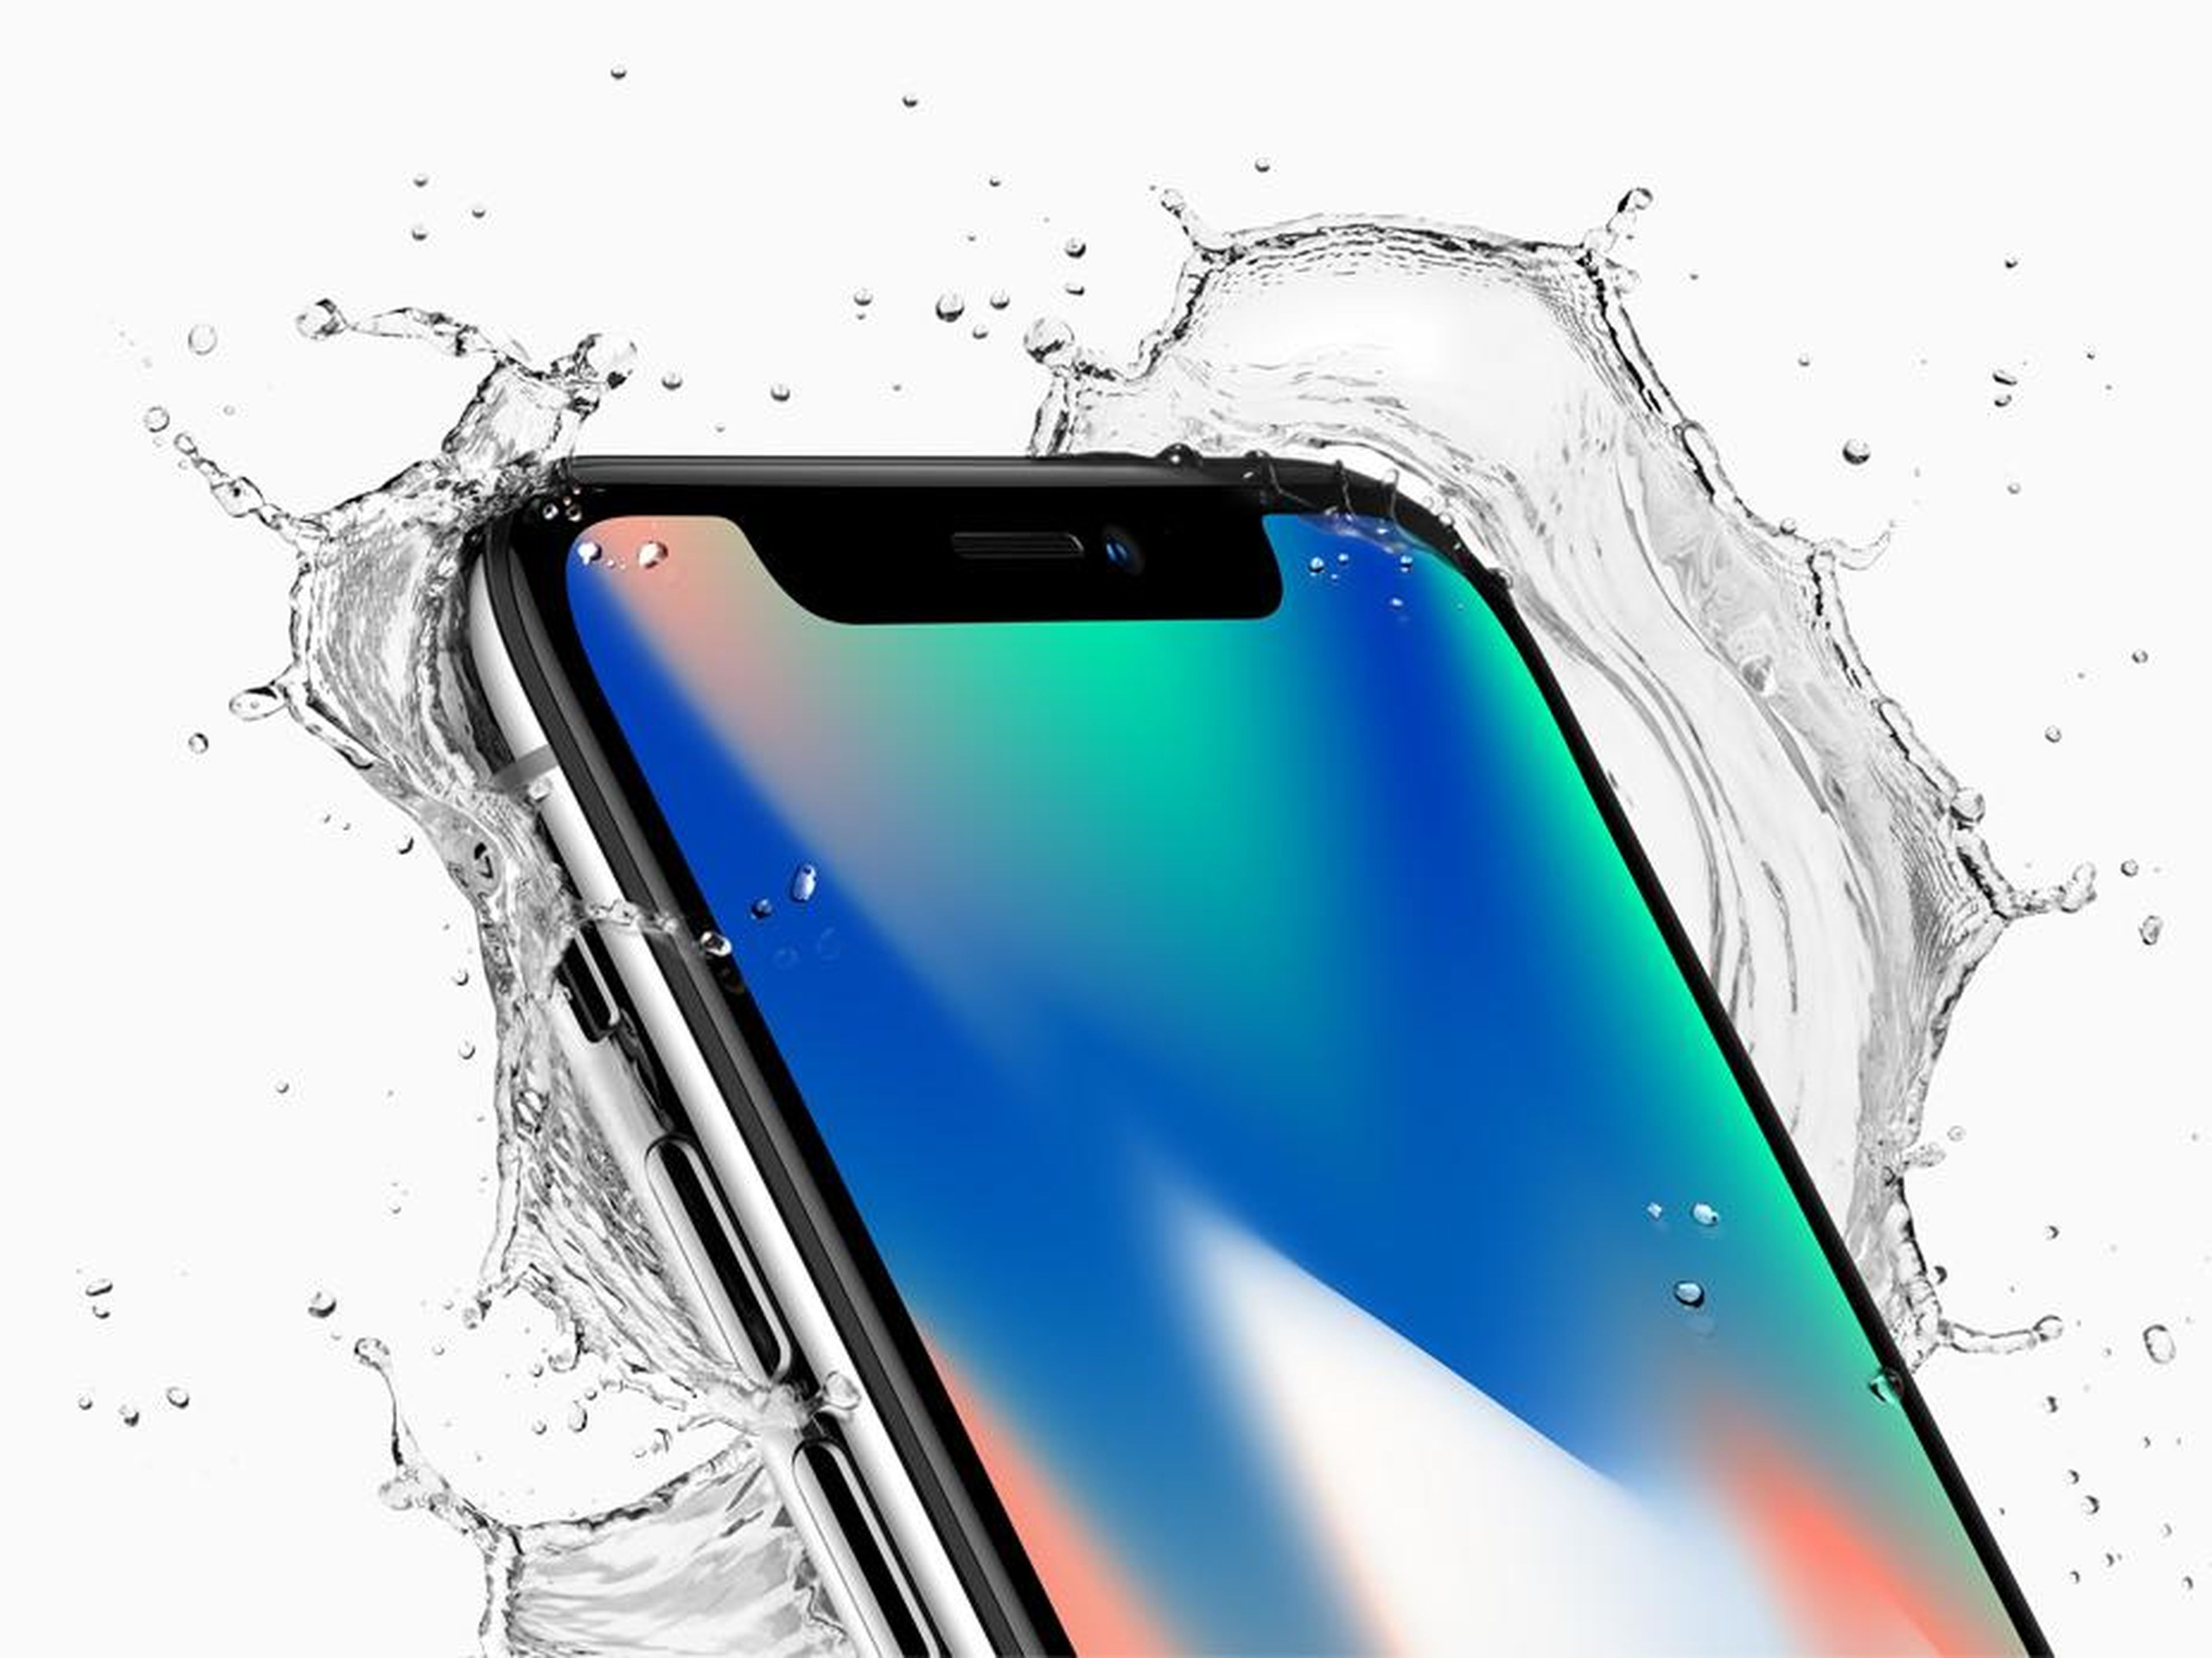 8. The iPhone XR isn't as water-resistant as the iPhone XS.